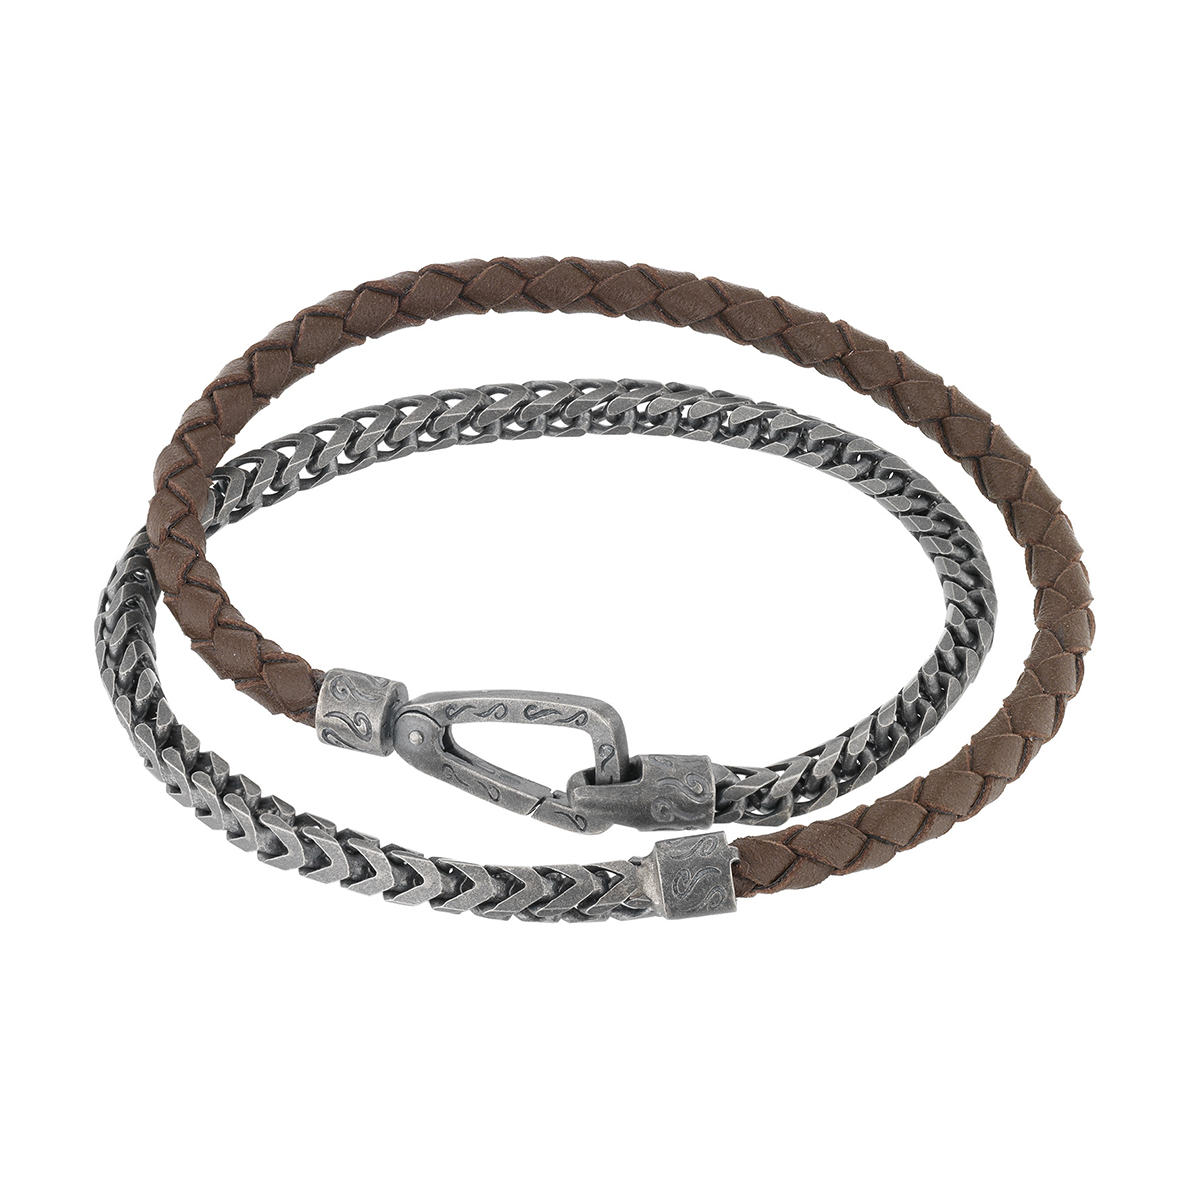 Marco Dal Maso Lash Double Wrap 8mm Silver Chain and Braided Brown ...